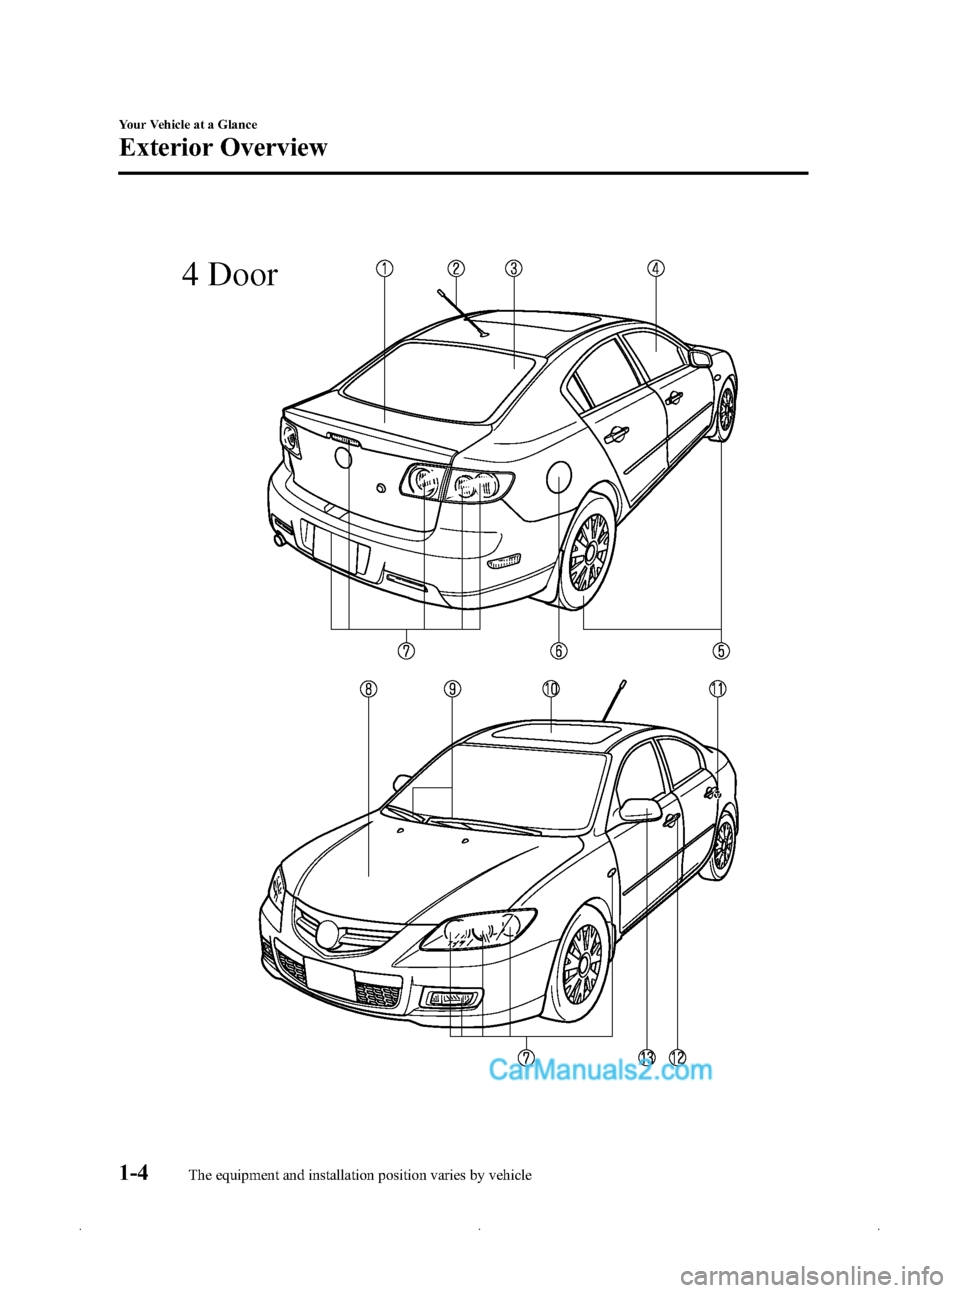 MAZDA MODEL MAZDASPEED 3 2009  Owners Manual (in English) Black plate (10,1)
4 Door
1-4
Your Vehicle at a Glance
The equipment and installation position varies by vehicle
Exterior Overview
Mazda3_8Z87-EA-08F_Edition1 Page10
Monday, May 19 2008 9:55 AM
Form N